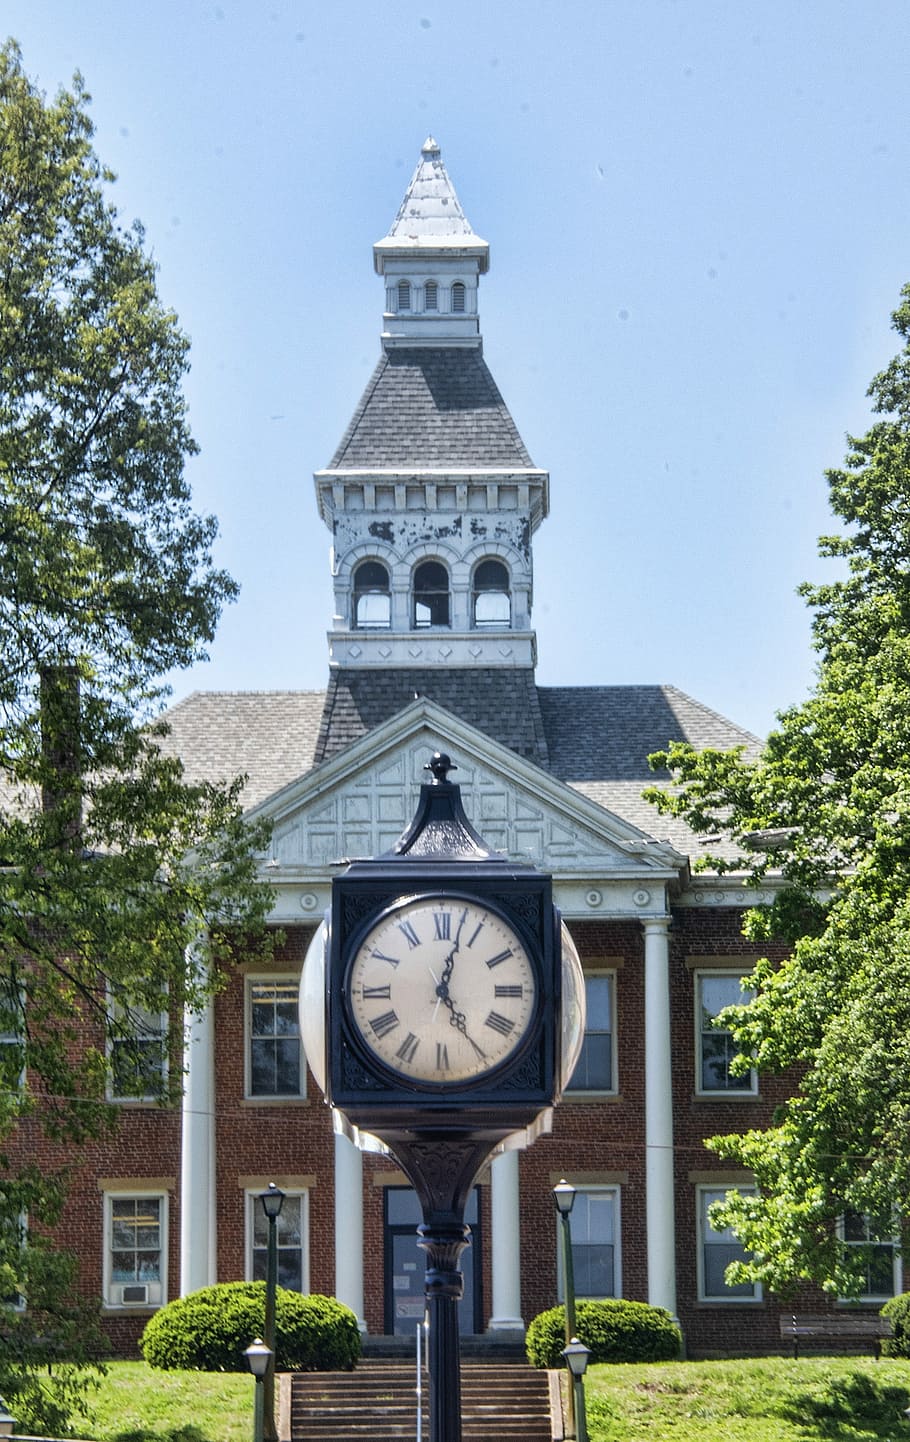 courthouse, clock, court, justice, architecture, landmark, city, historic, courtroom, business